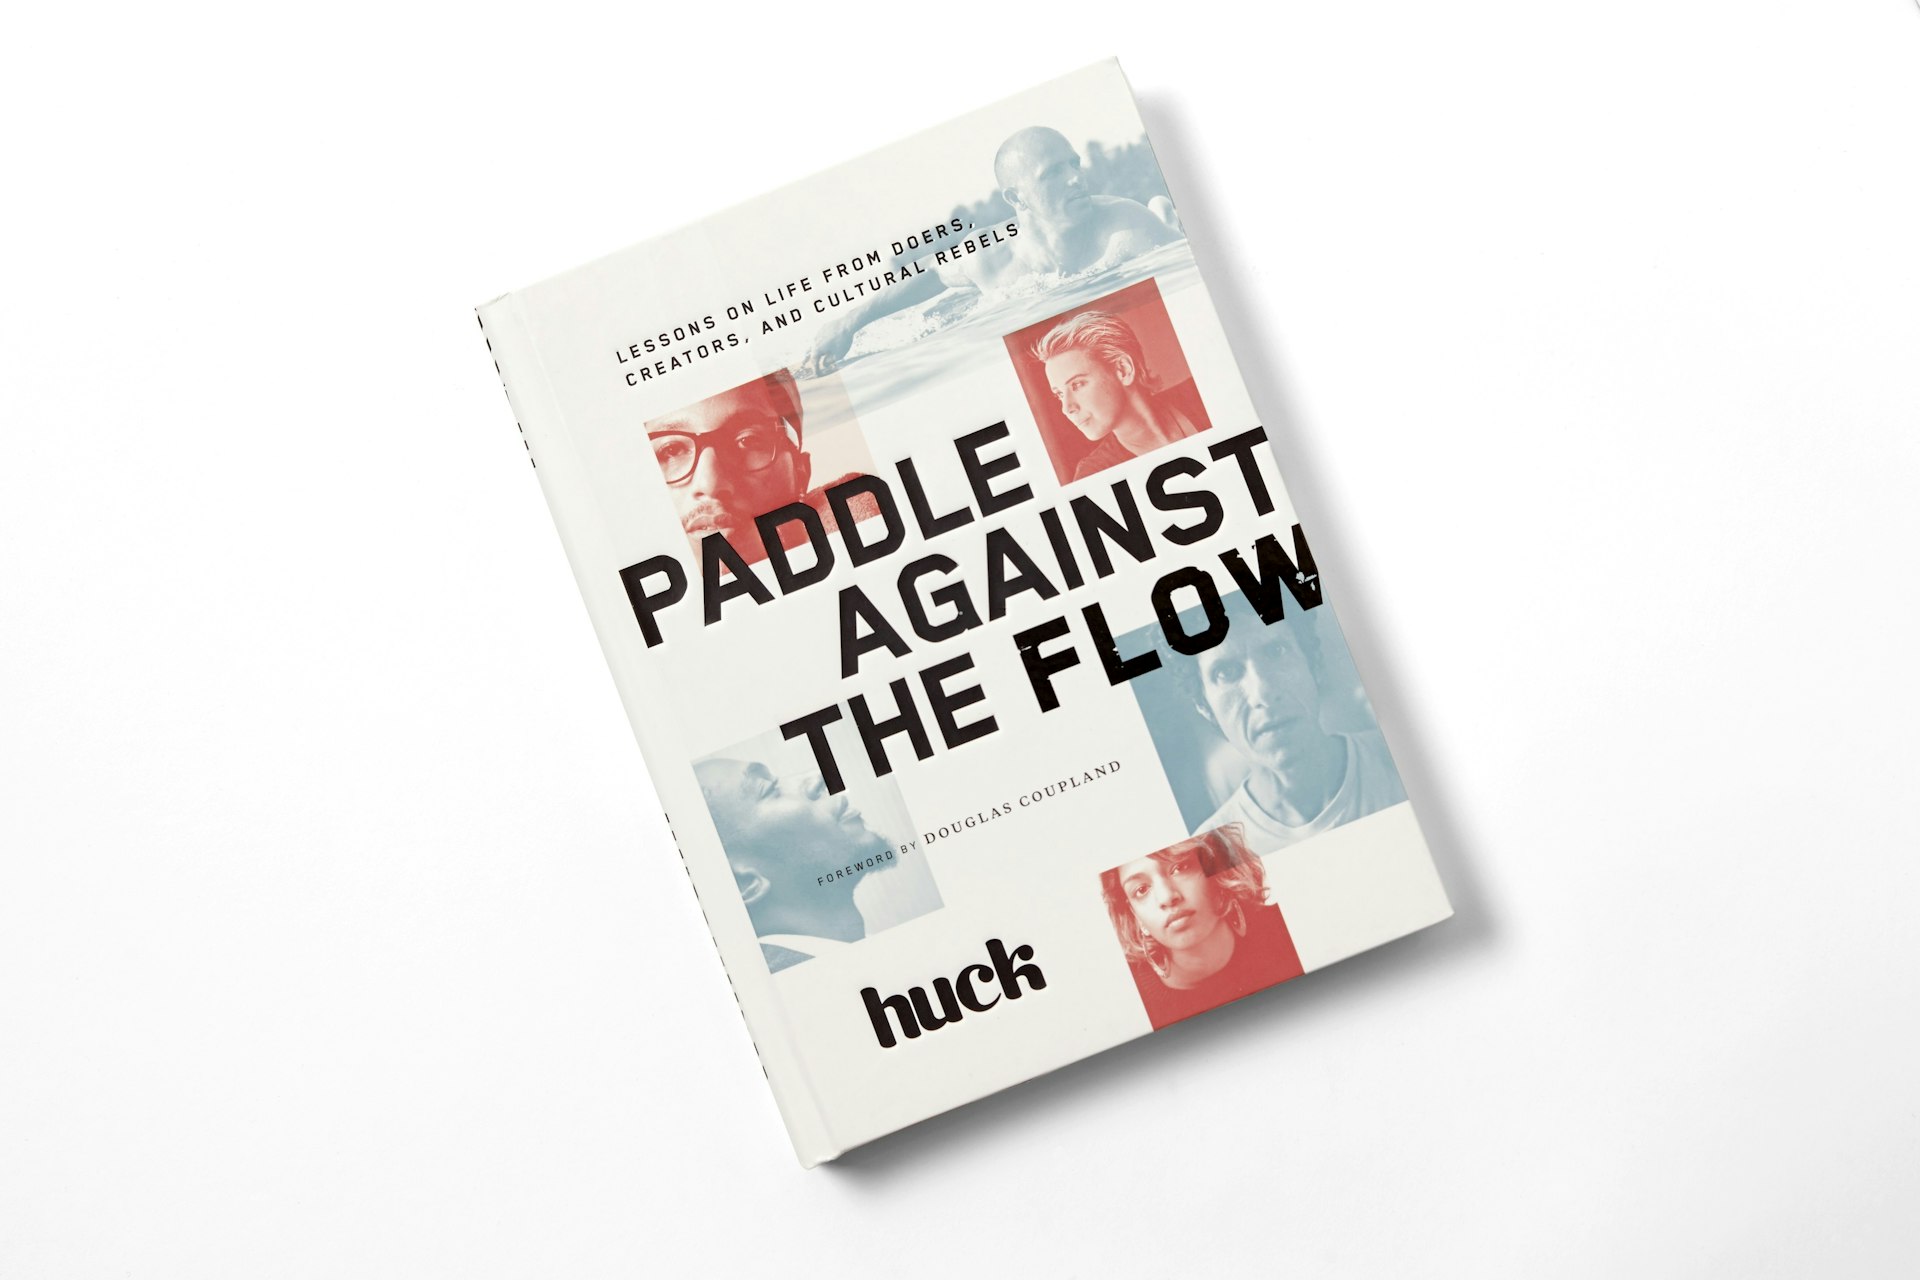 Win Paddle Against the Flow prizes at Urban Outfitters